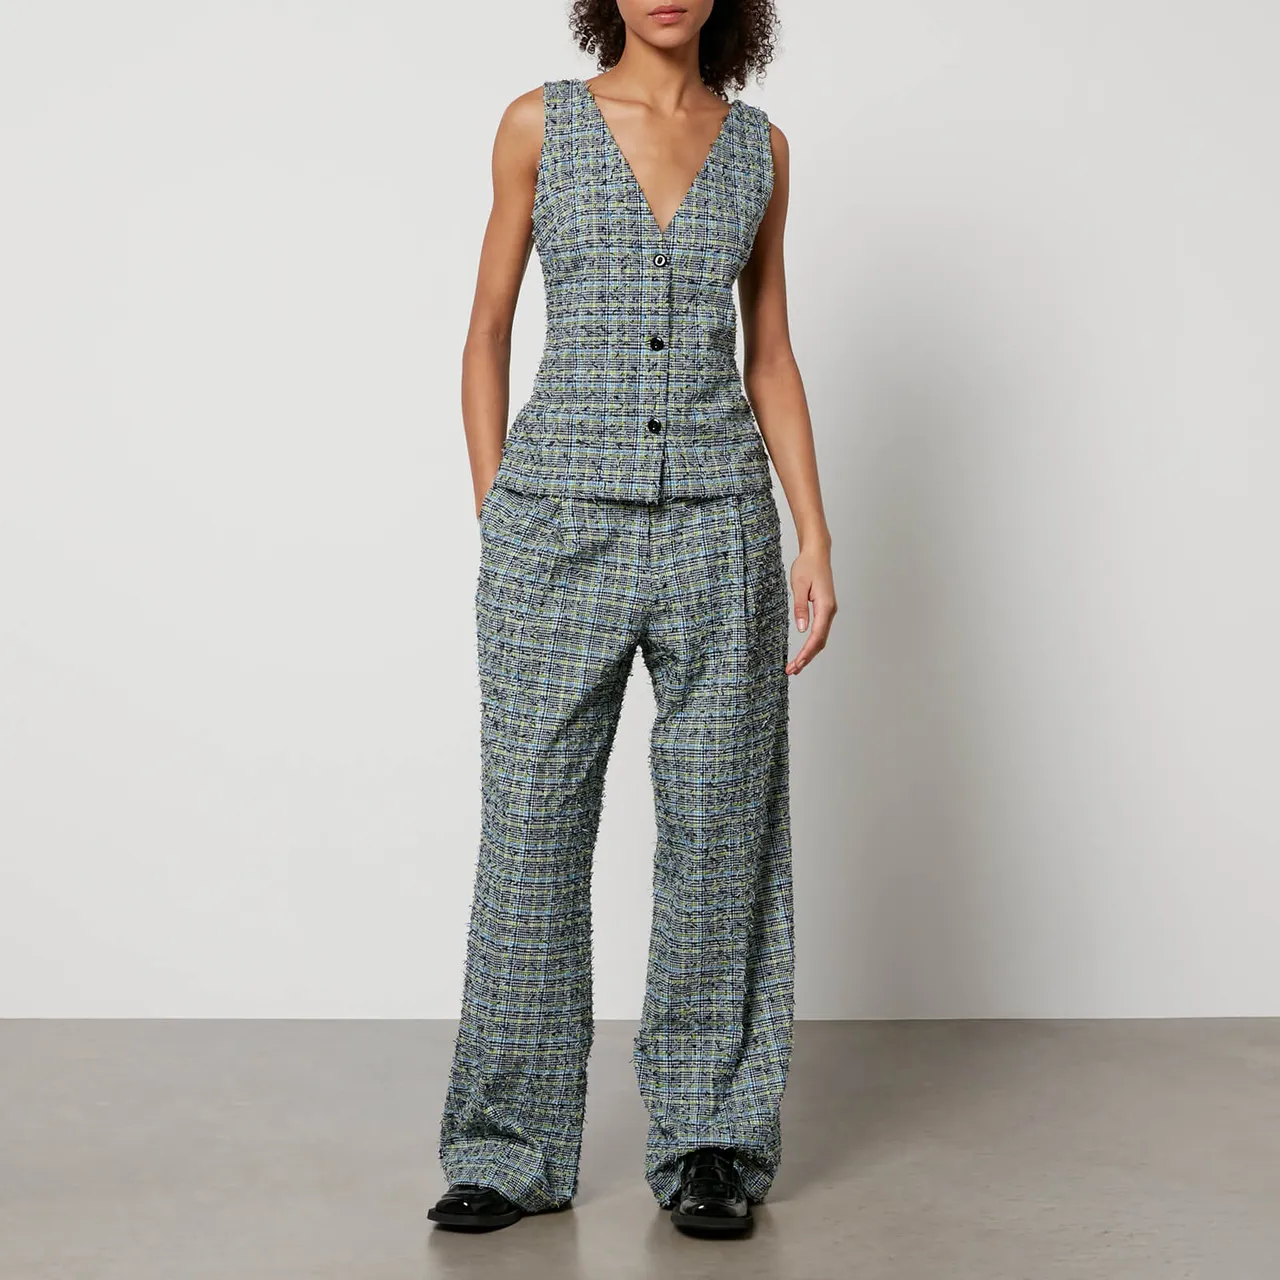 Stine Goya Jesabelle Distressed Houndstooth Trousers